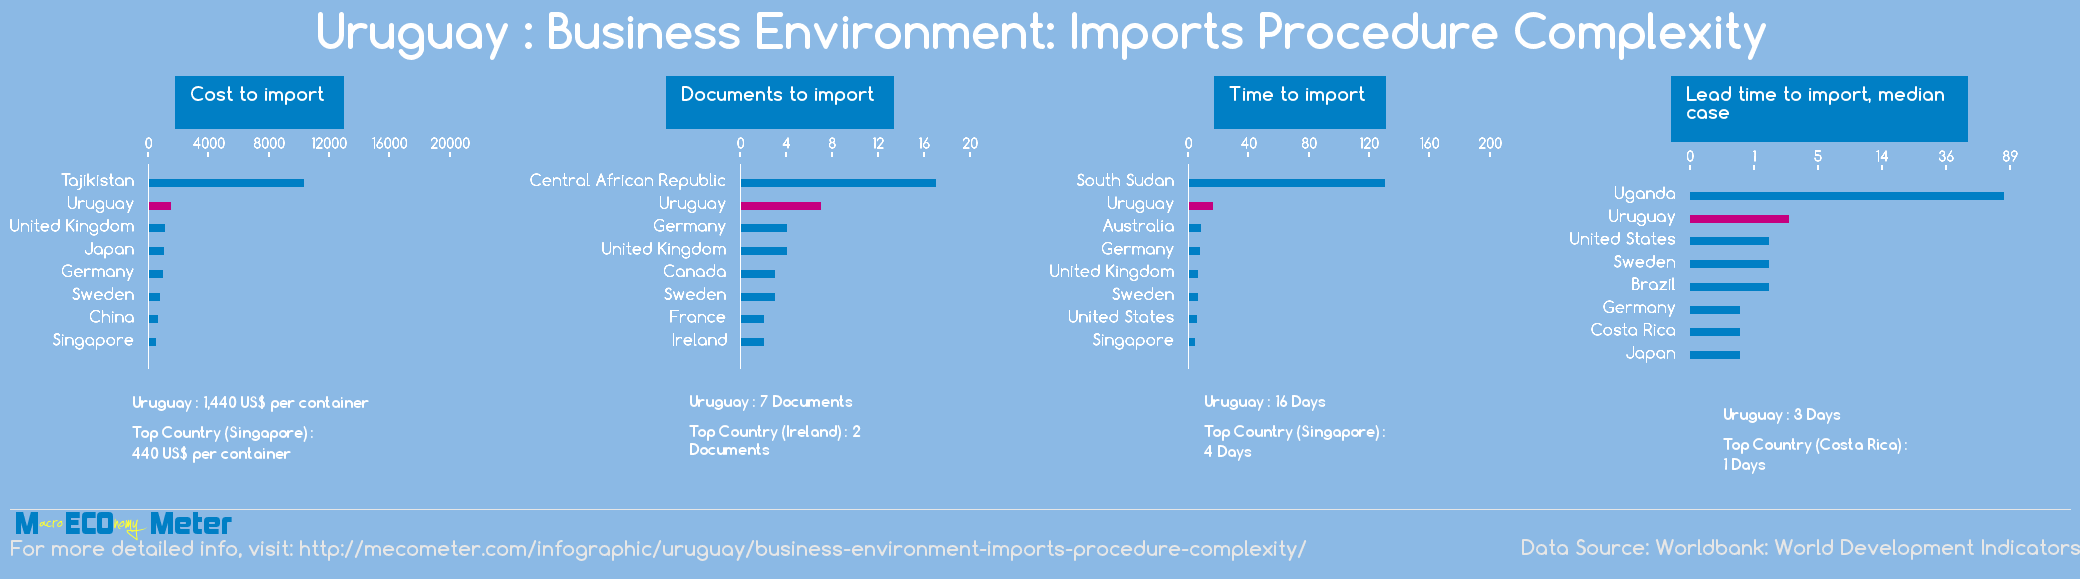 Uruguay : Business Environment: Imports Procedure Complexity